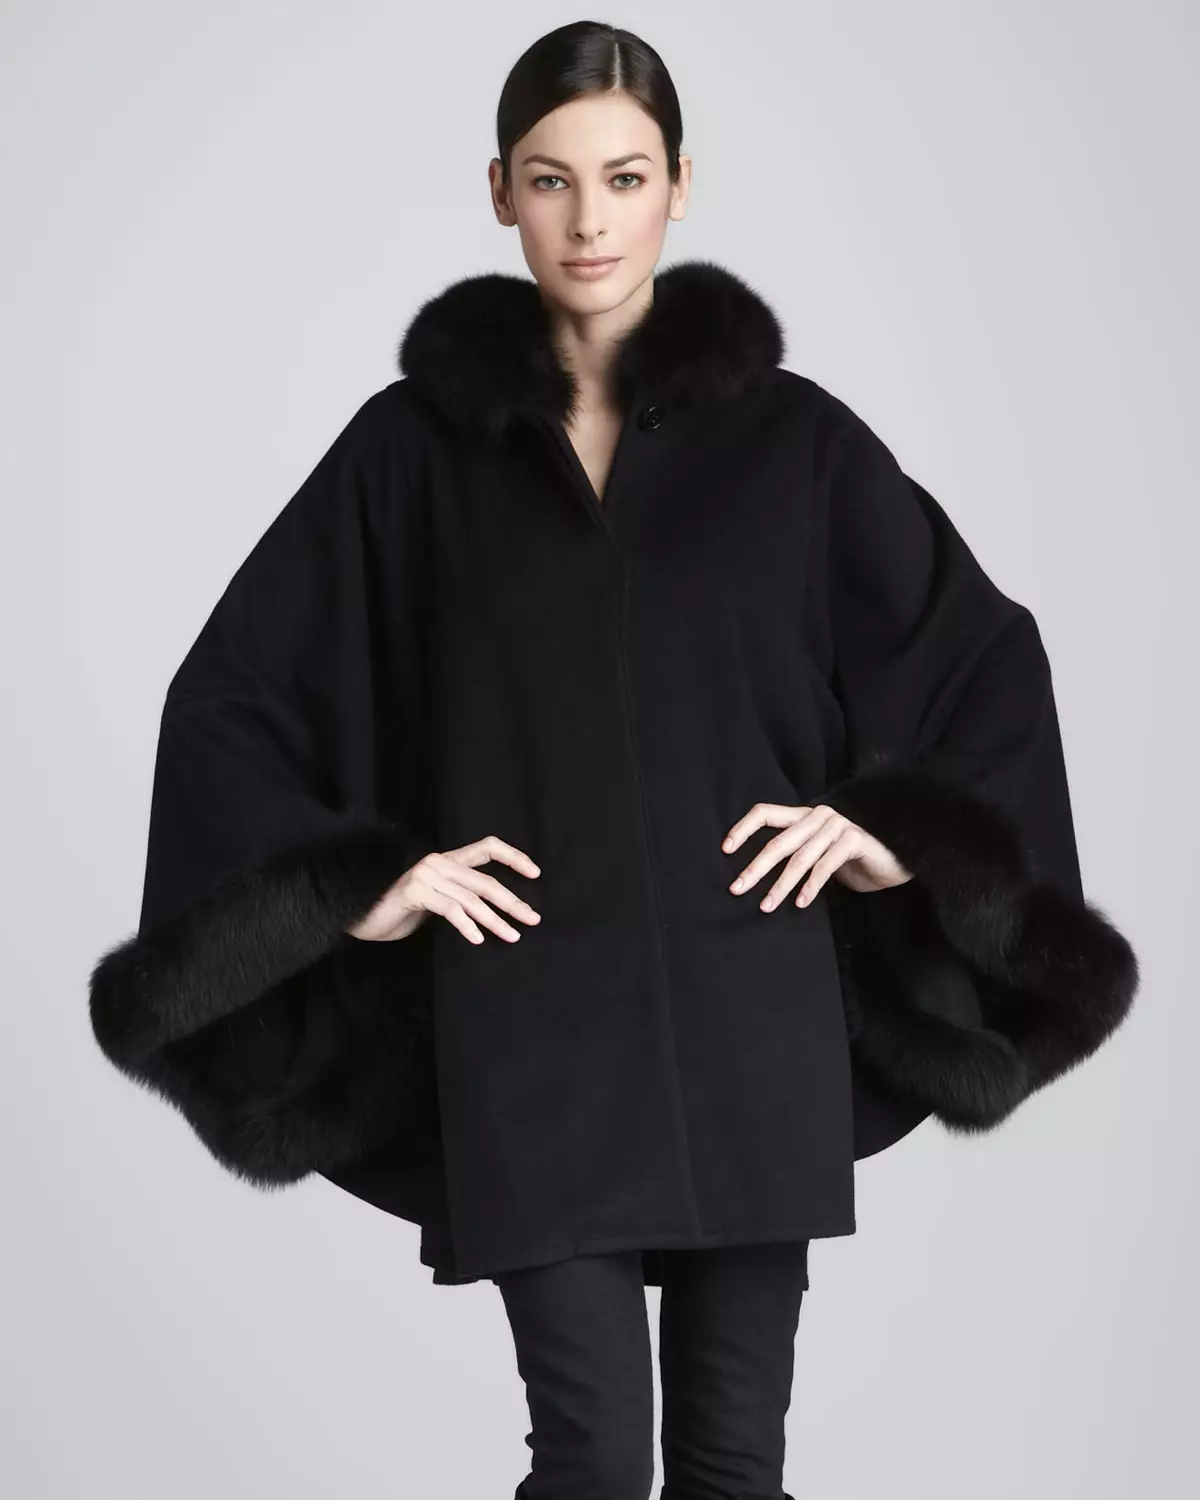 Winter Women's Coat (384 photos): Fashionable 2021 on Sintepsum, Hooded, Youth, Woolen, For Pregnant, Coat Down 643_62